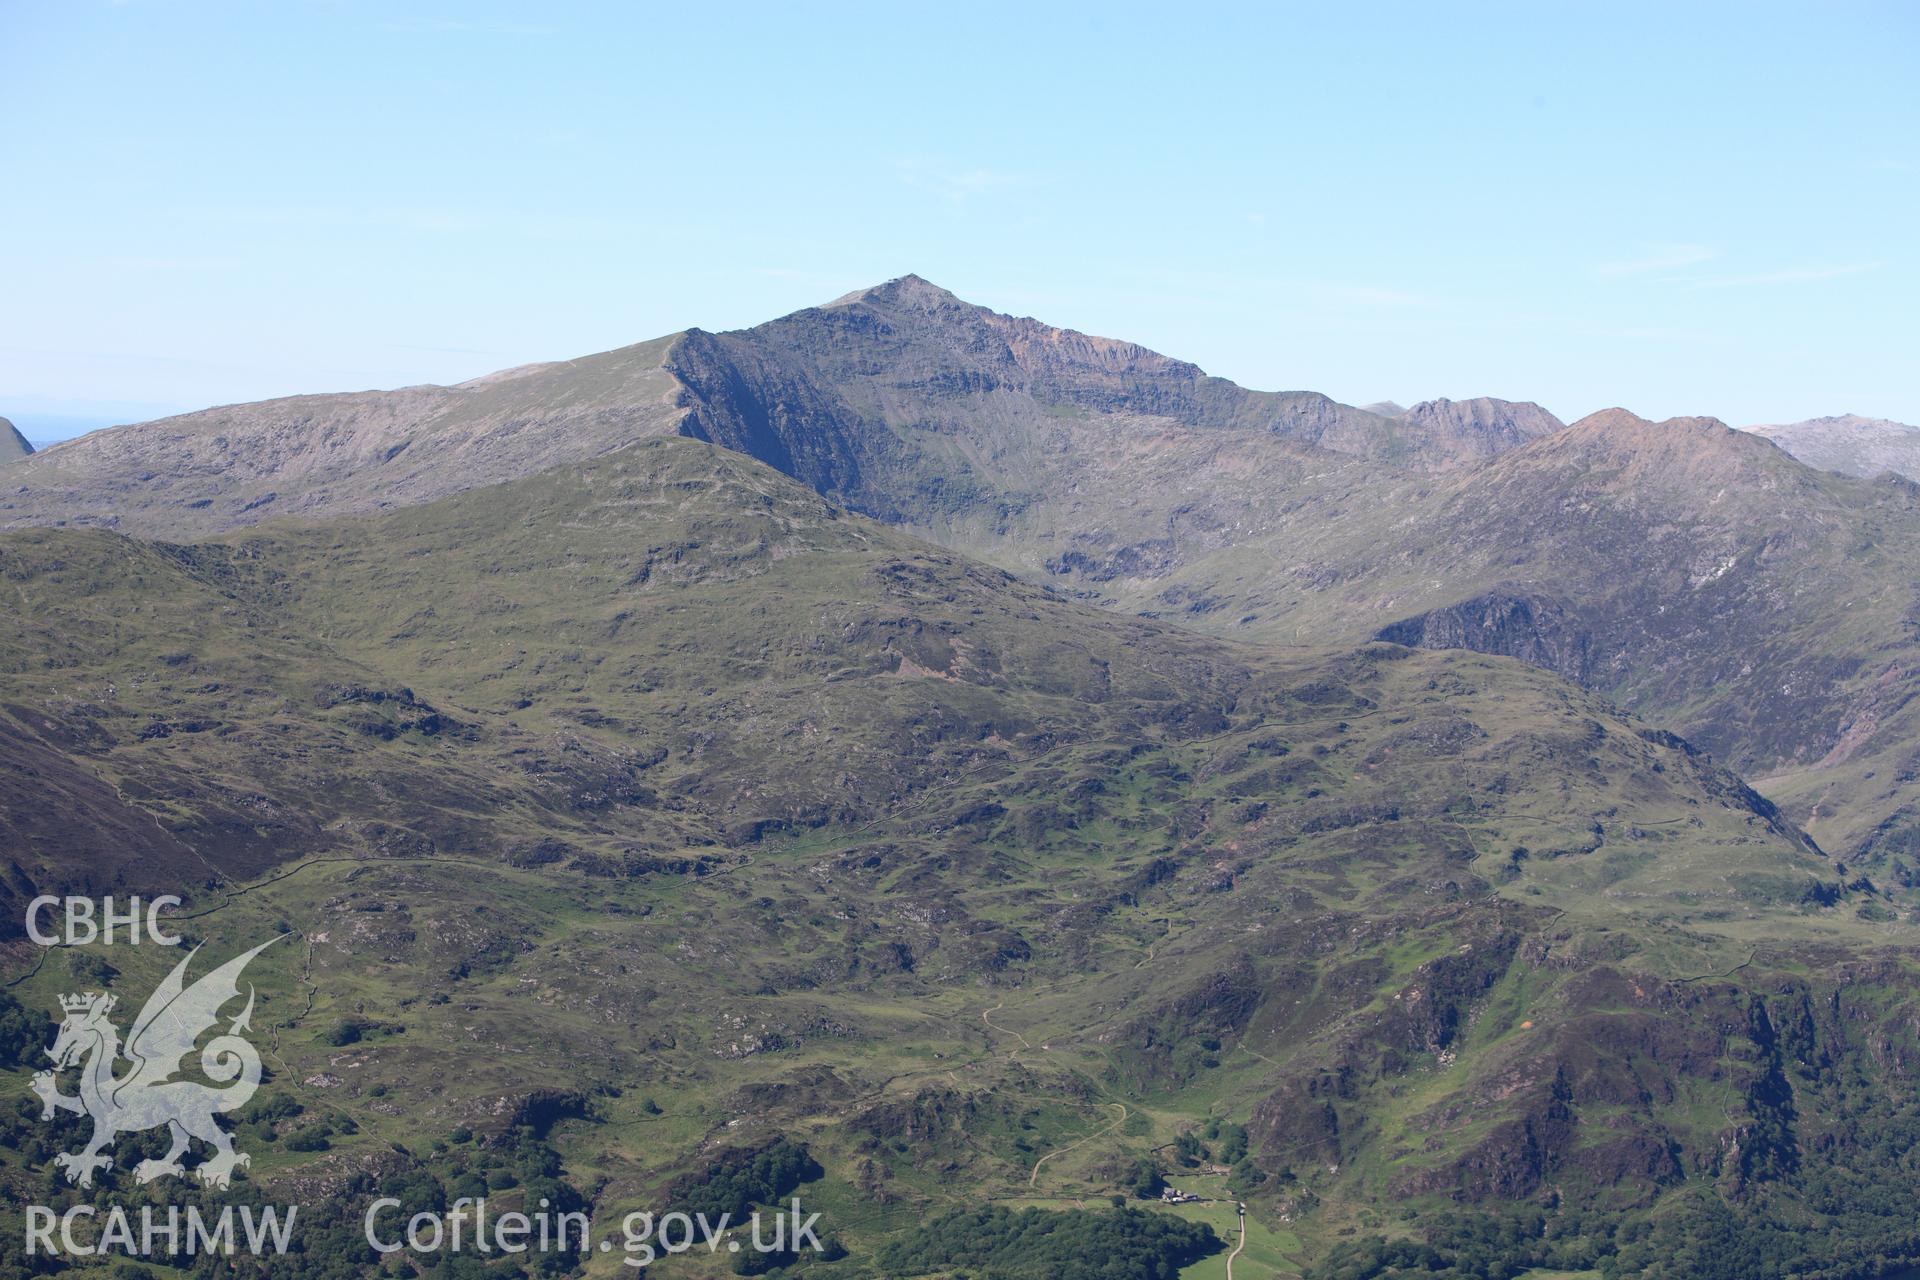 RCAHMW colour oblique photograph of Dinas Emrys Camp with Snowdon behind. Taken by Toby Driver on 16/06/2010.